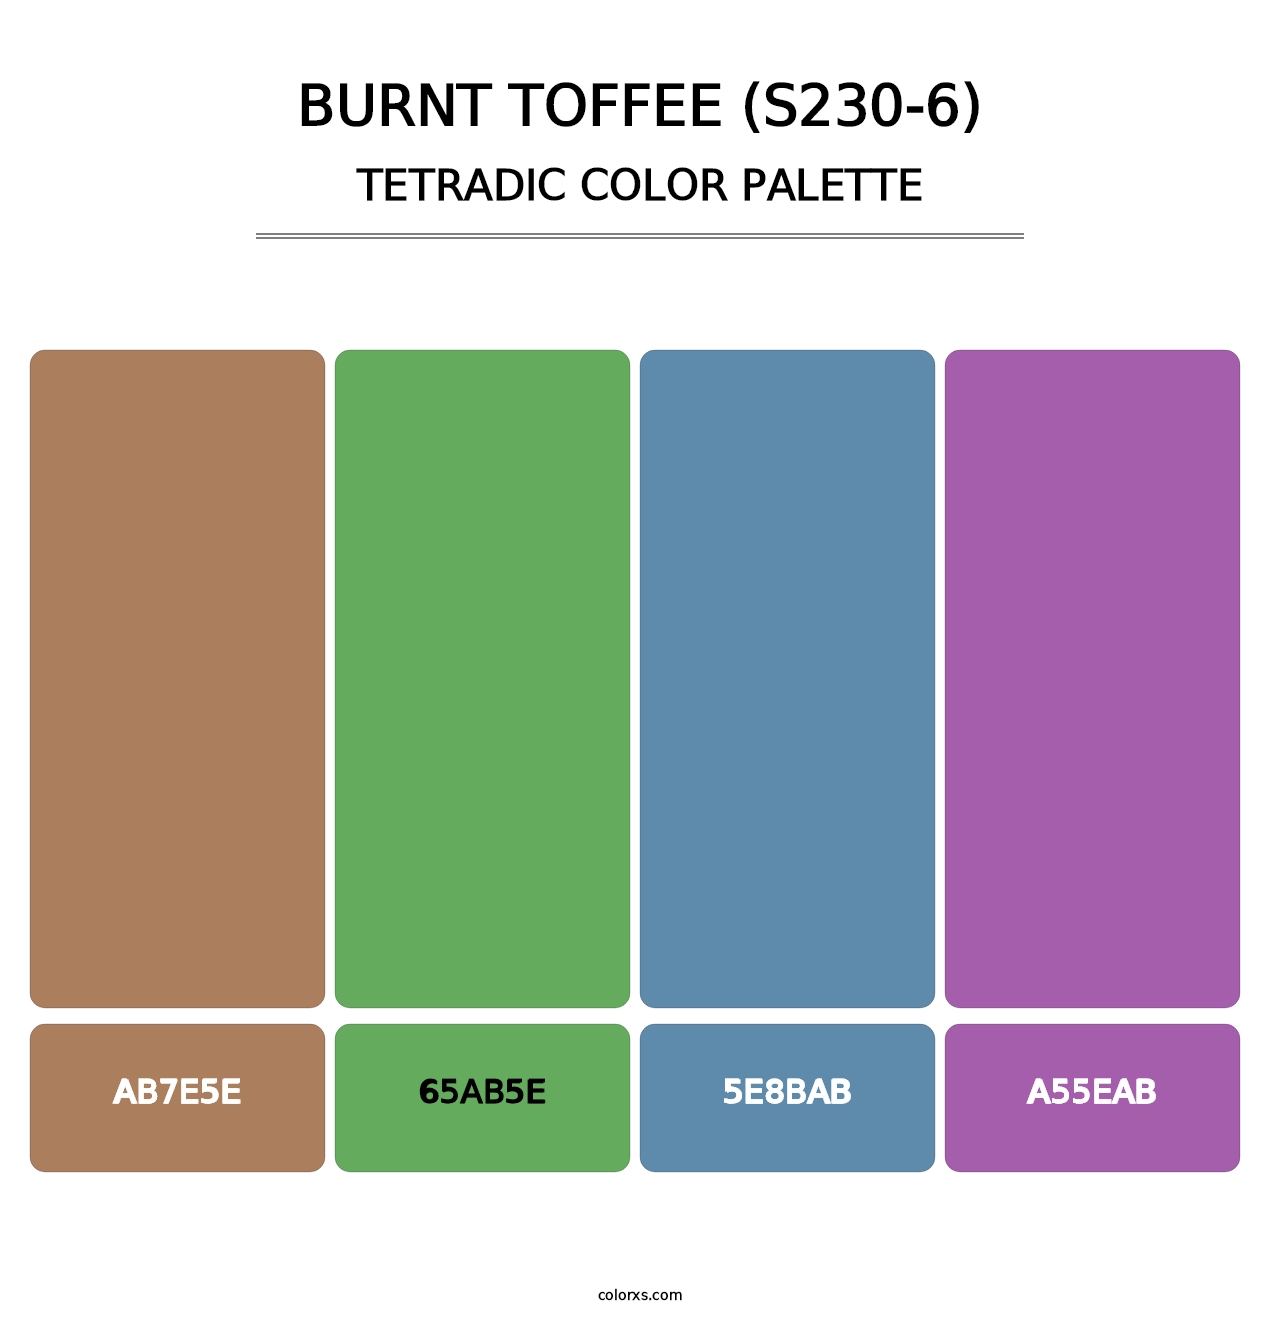 Burnt Toffee (S230-6) - Tetradic Color Palette